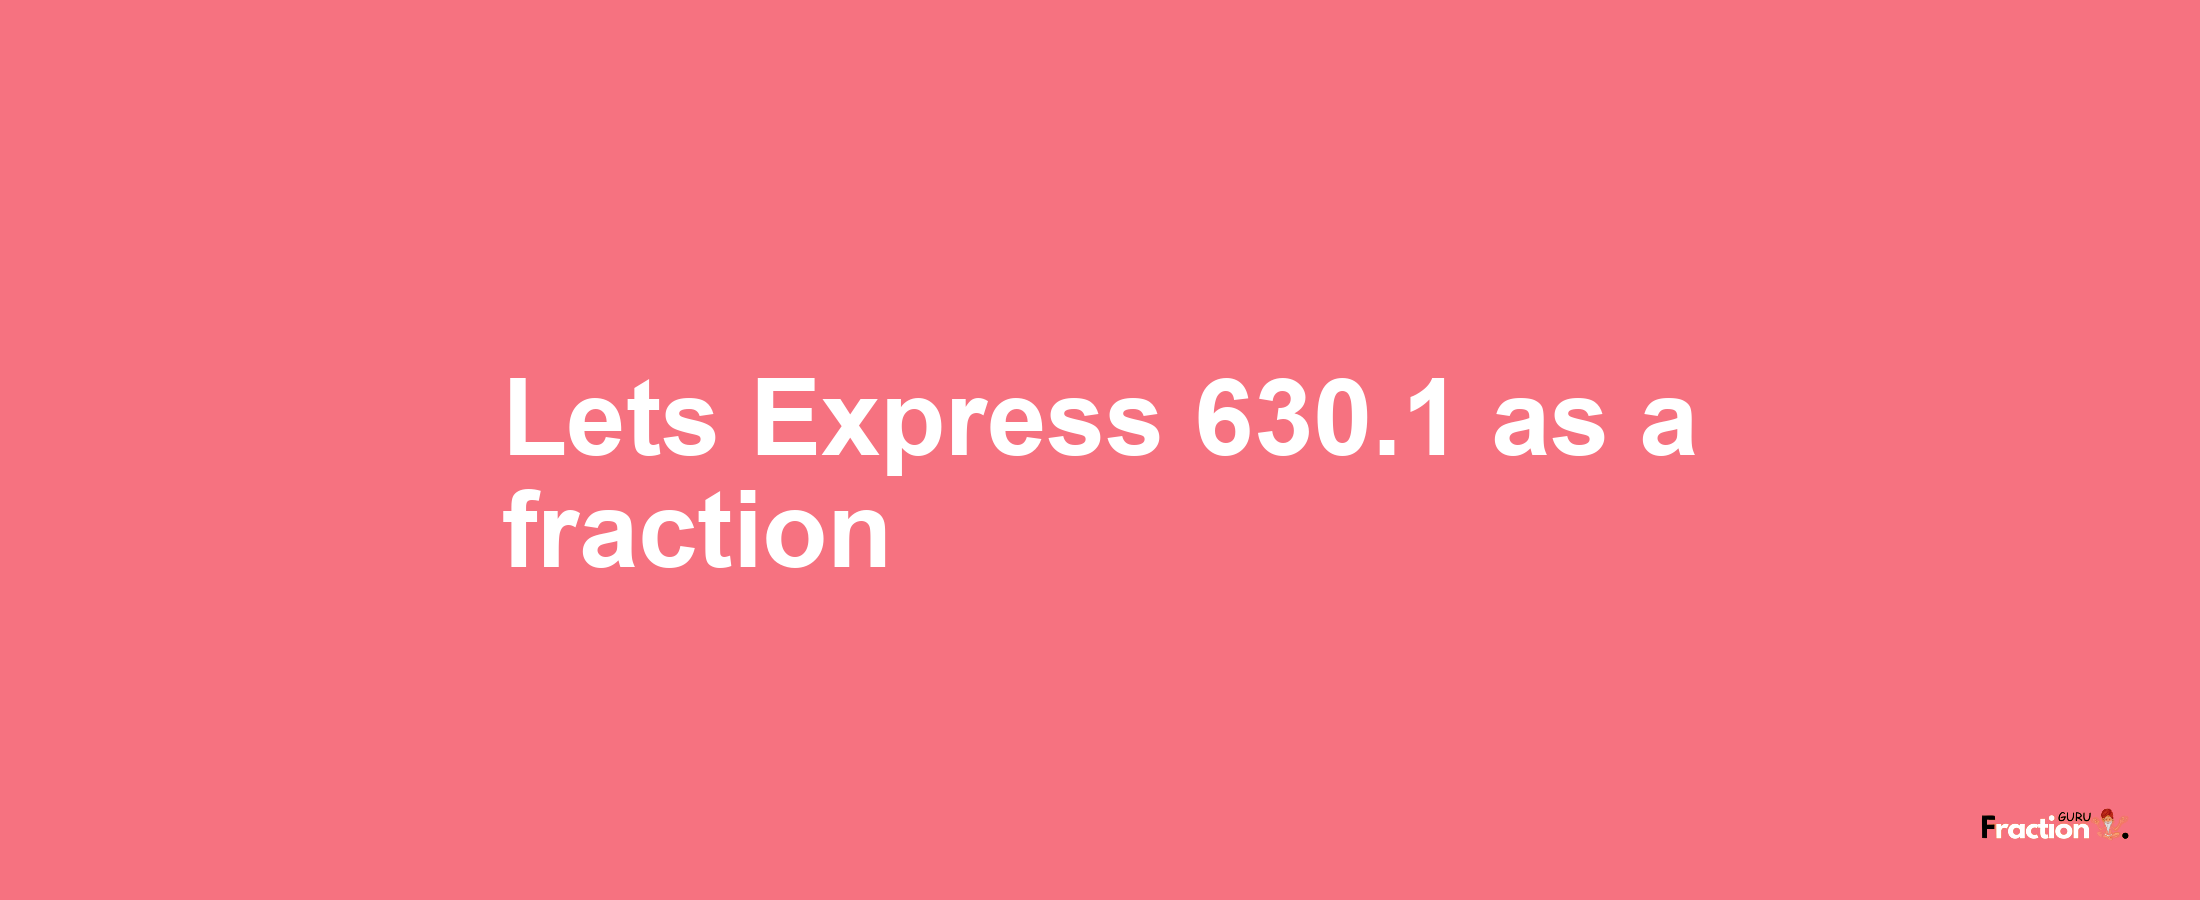 Lets Express 630.1 as afraction